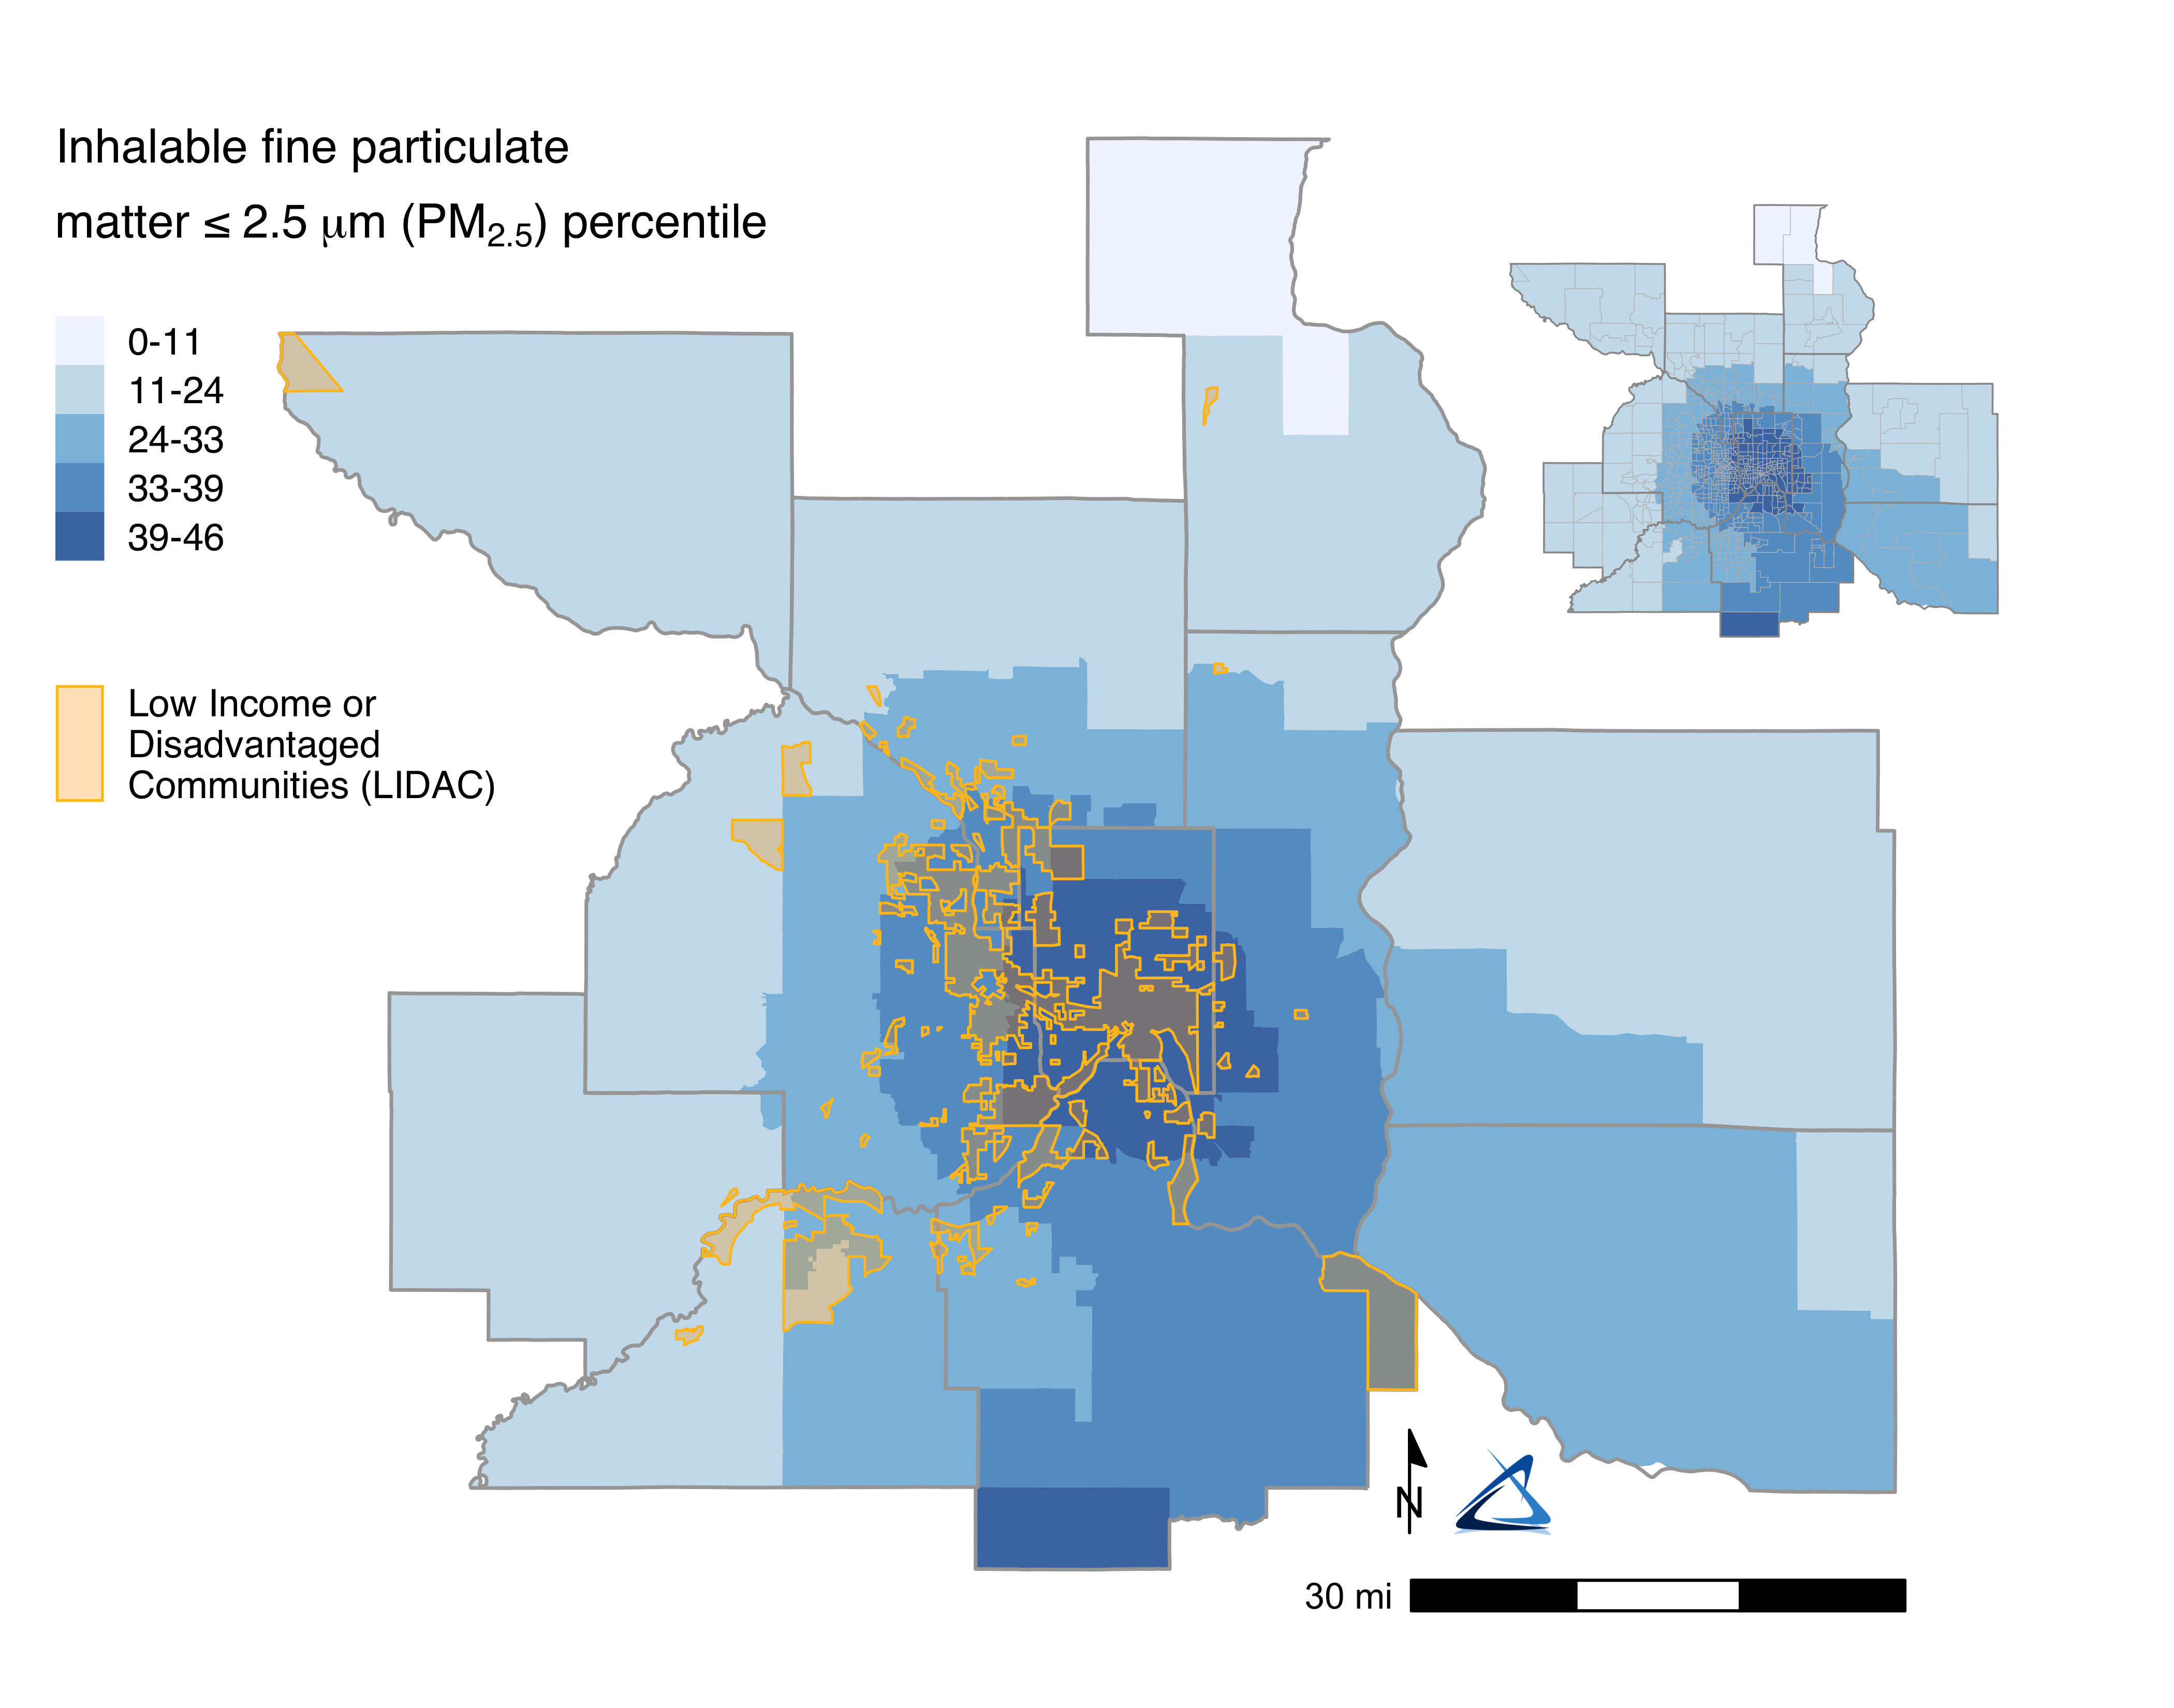 A map of LIDAC block groups overlaying concentrations of inhalable fine particulate matter. There is noticeable overlap in the most polluted regions and where LIDAC block groups are concentrated, particularly in Ramsey County.